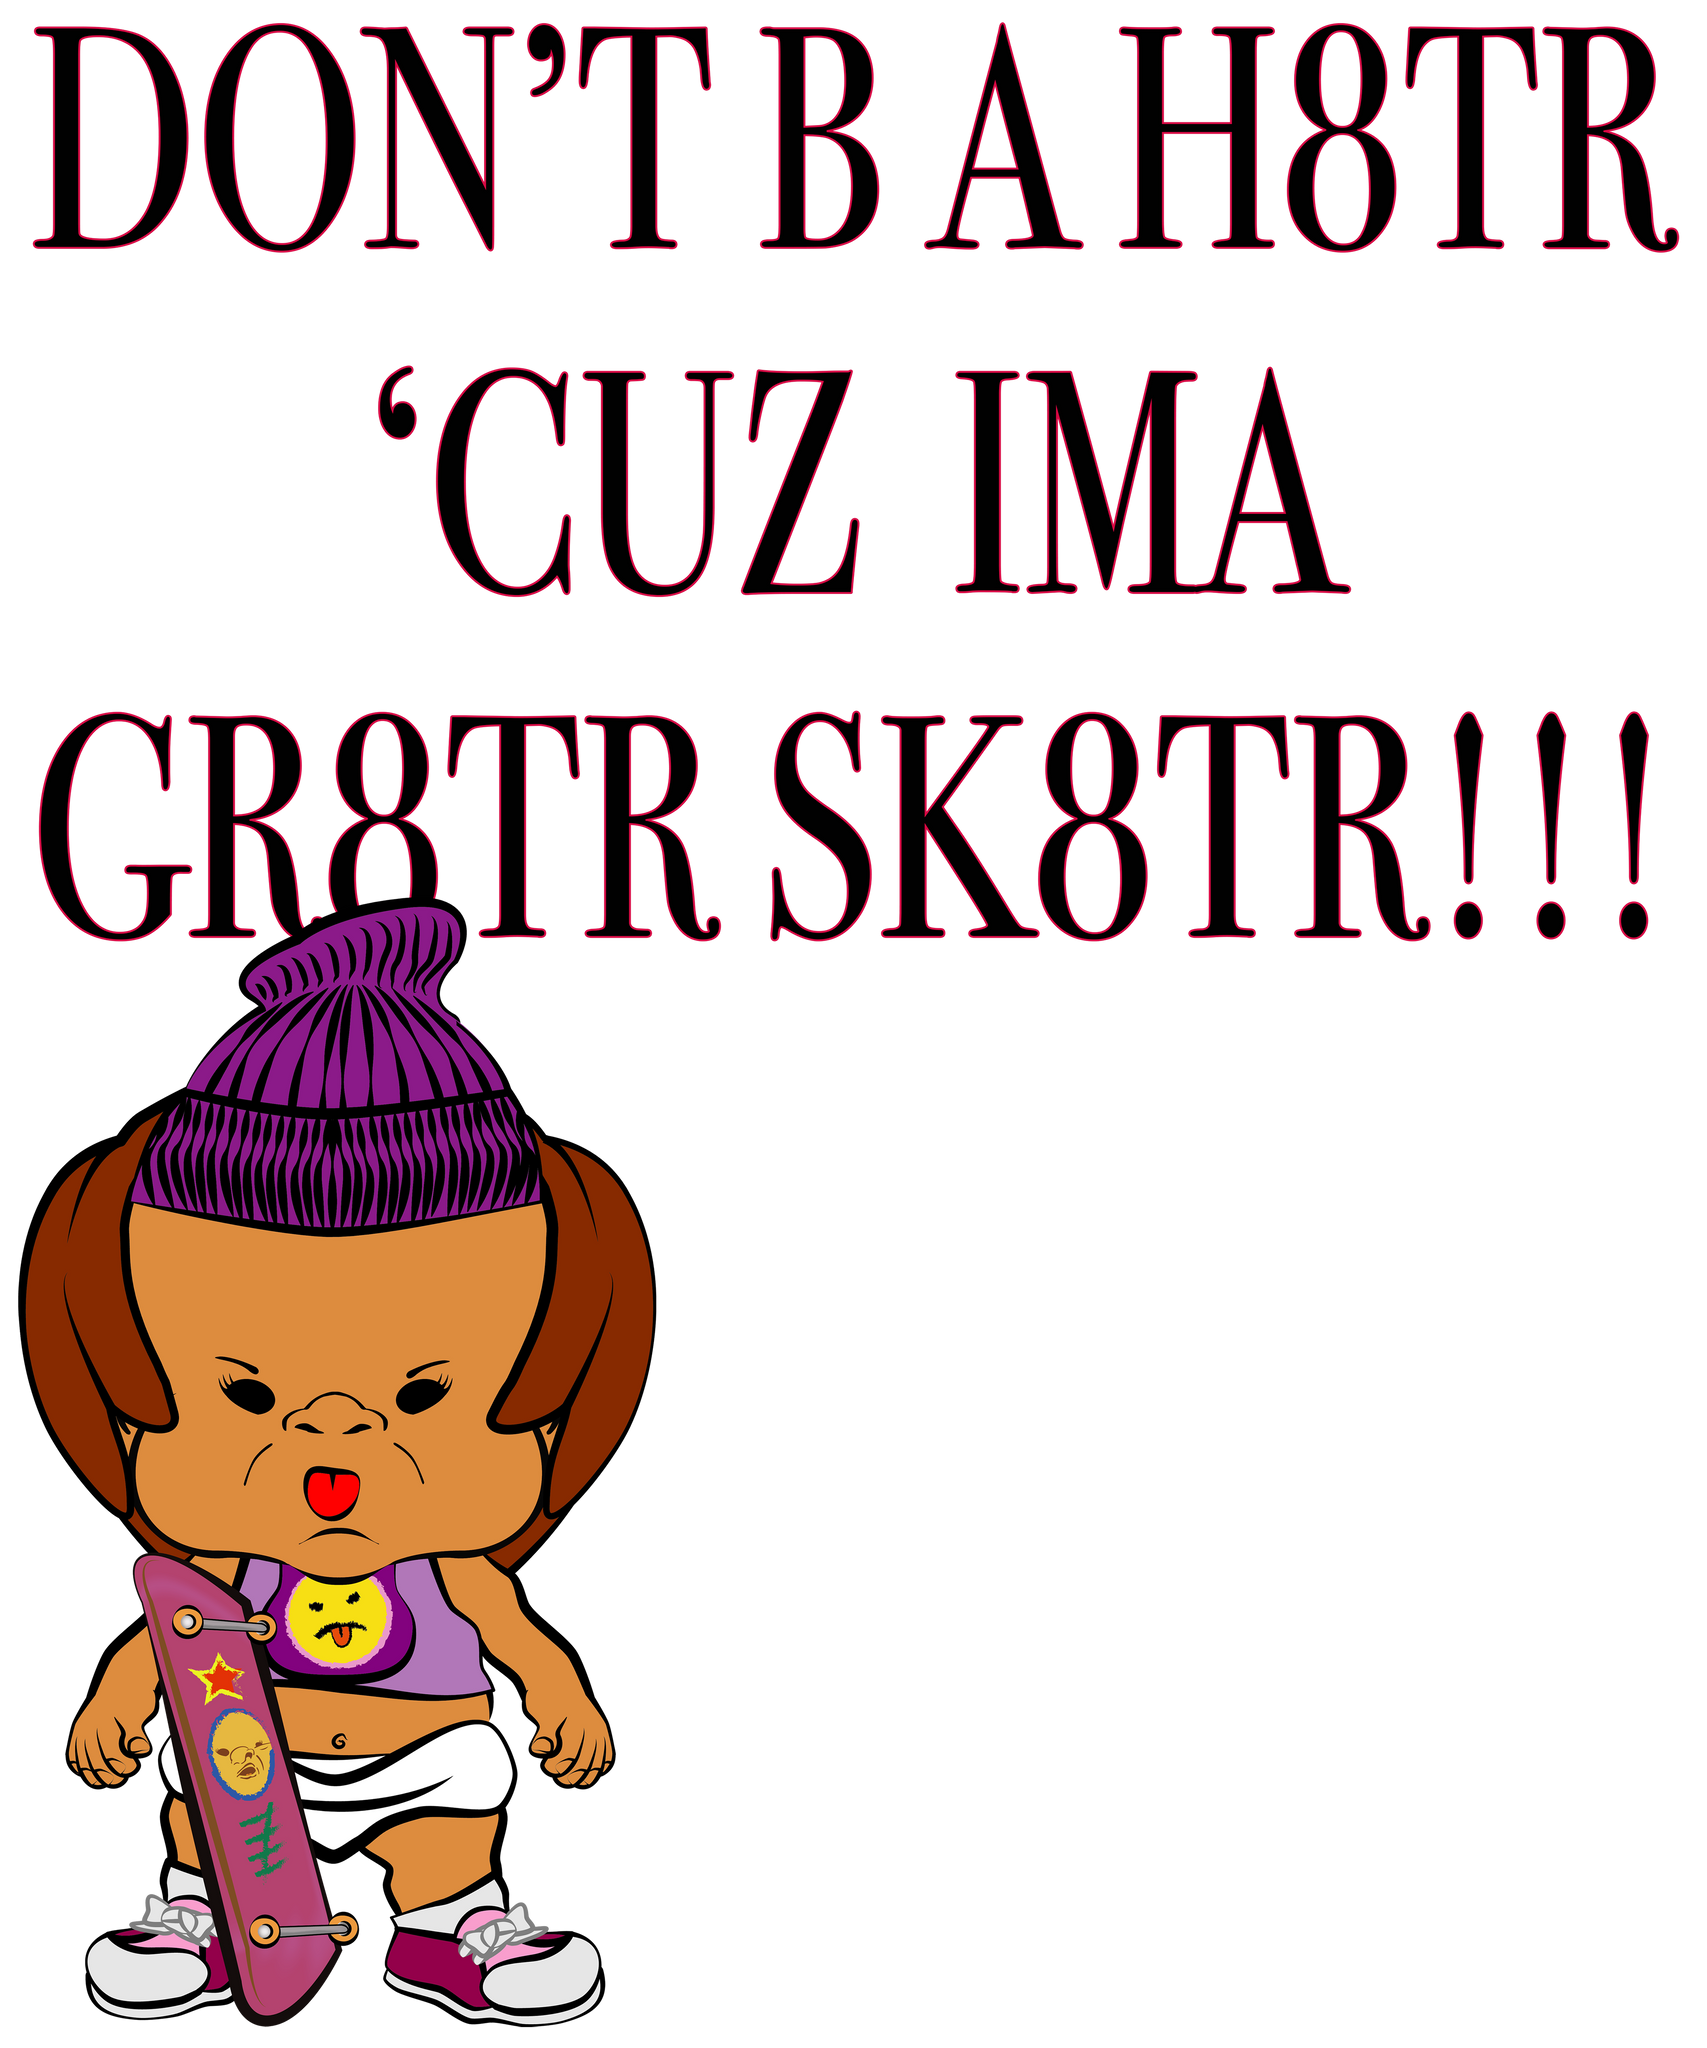 PBTZ1006_Skaterz_don't be a h8tr_girl_6